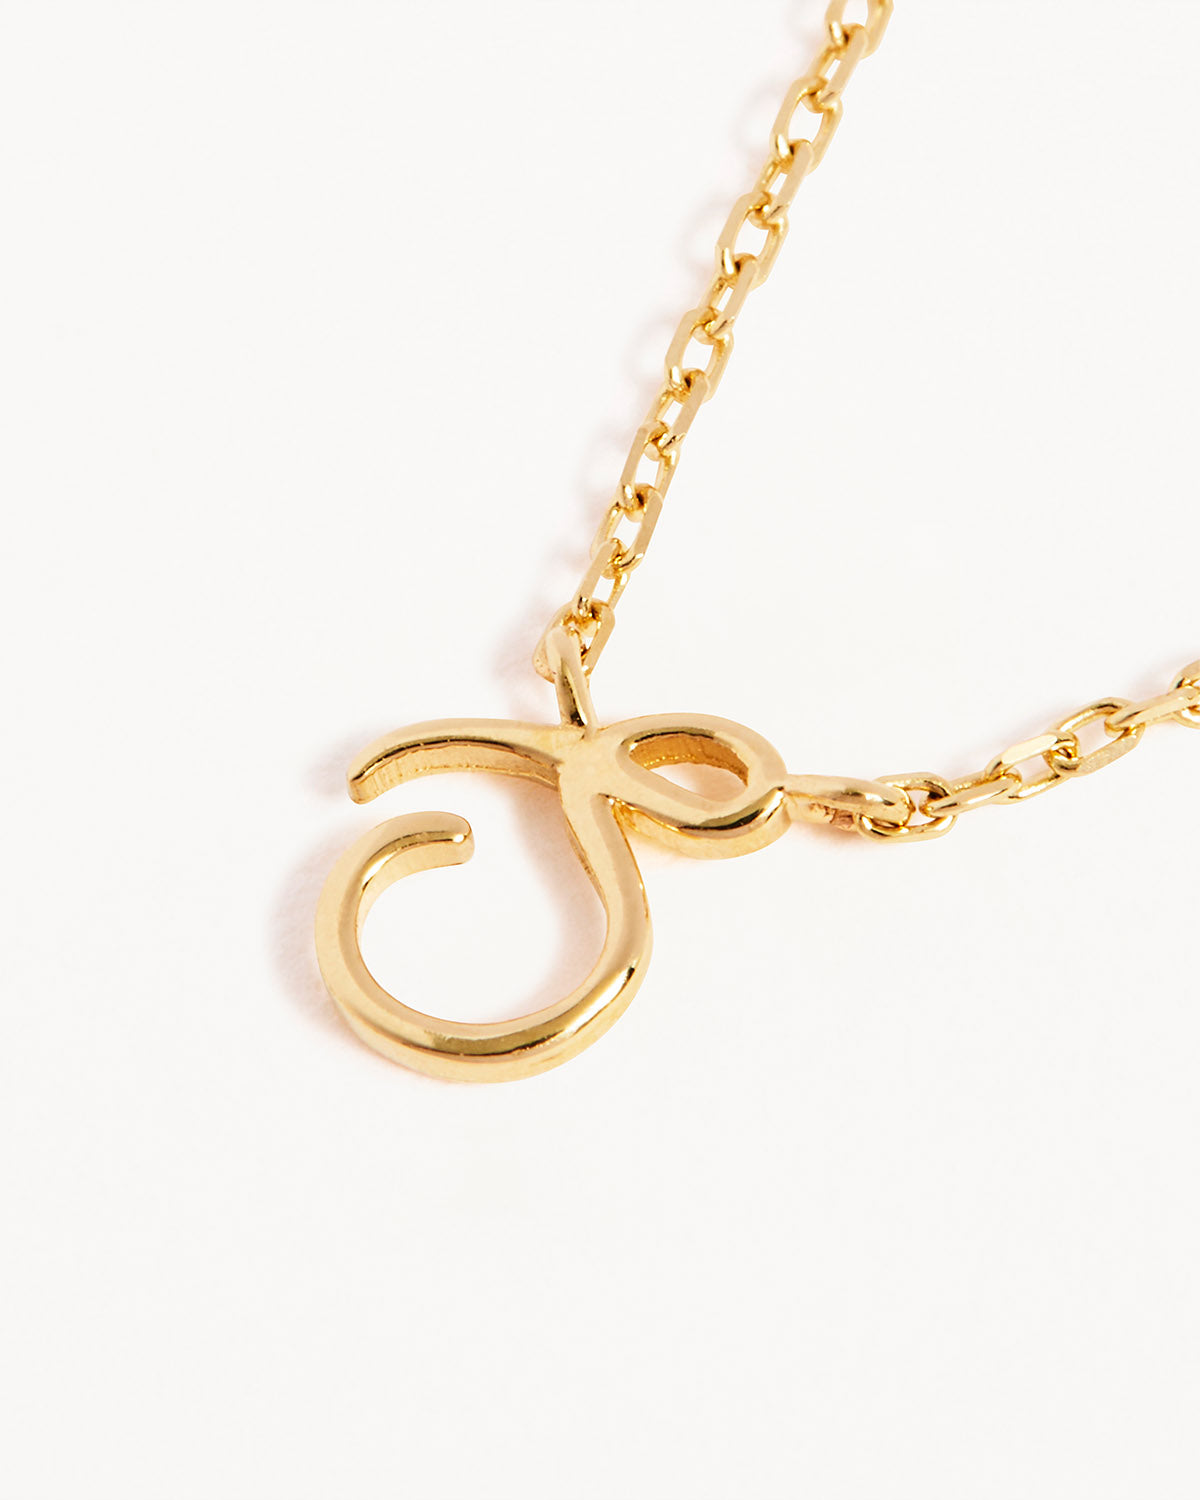 Personalized Gold Initial Necklaces - Admiral Row